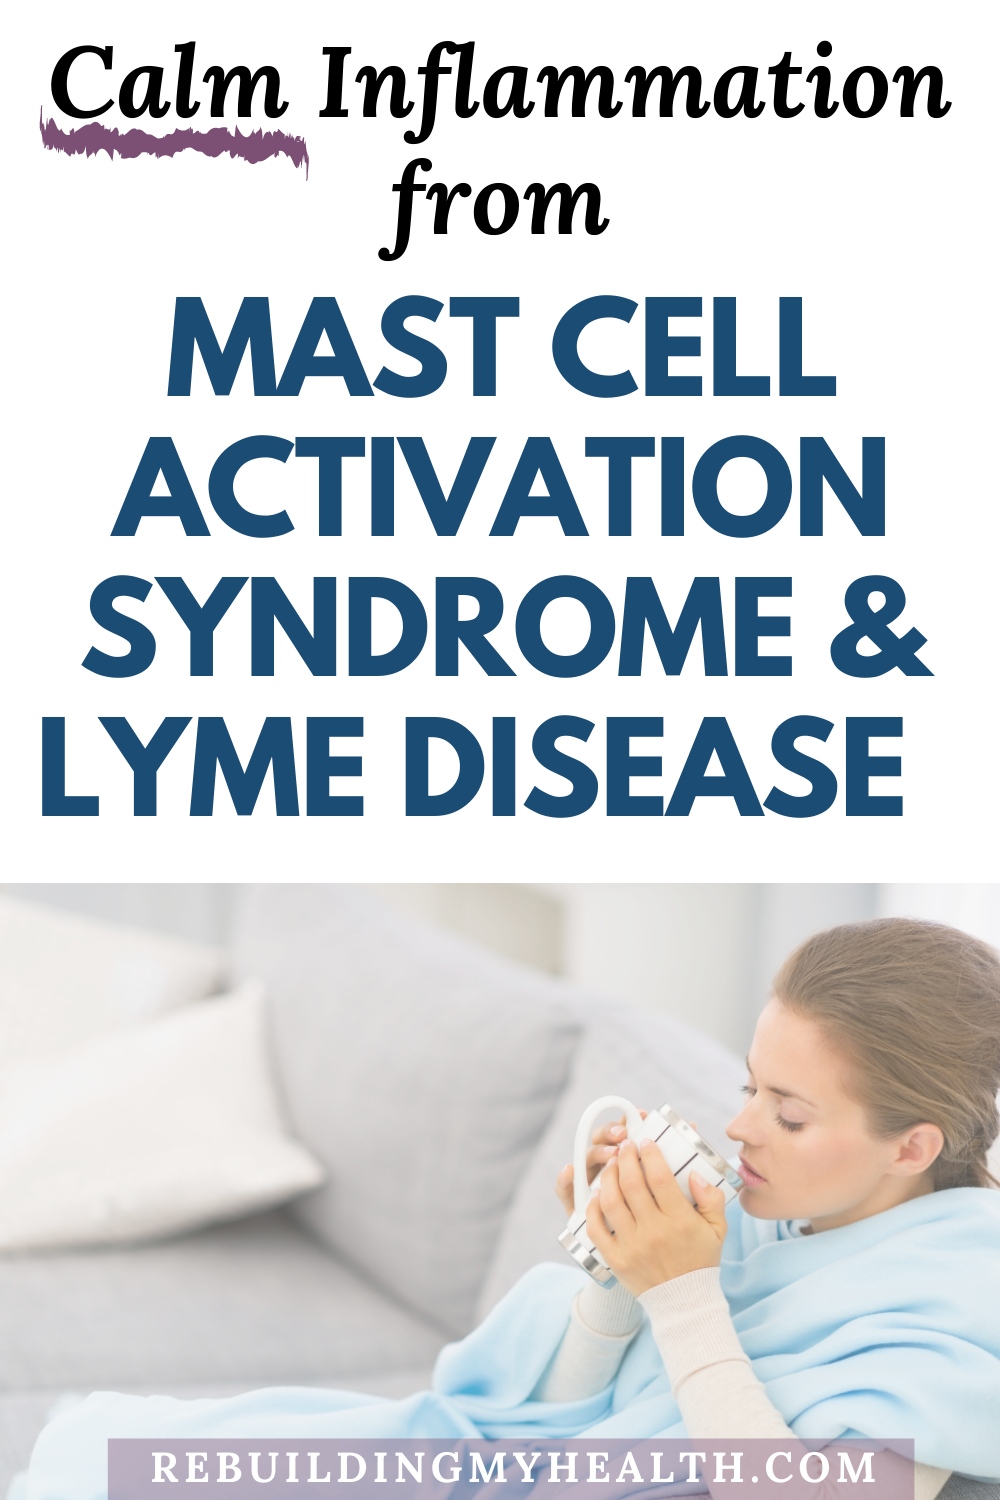 Learn about natural solutions for Mast Cell Activation Syndrome and Lyme disease. For relief from Mast Cell Activation Syndrome (MCAS), Lyme disease, inflammation and pain, Beth turned to diet, detox, nutrition and stress reduction.